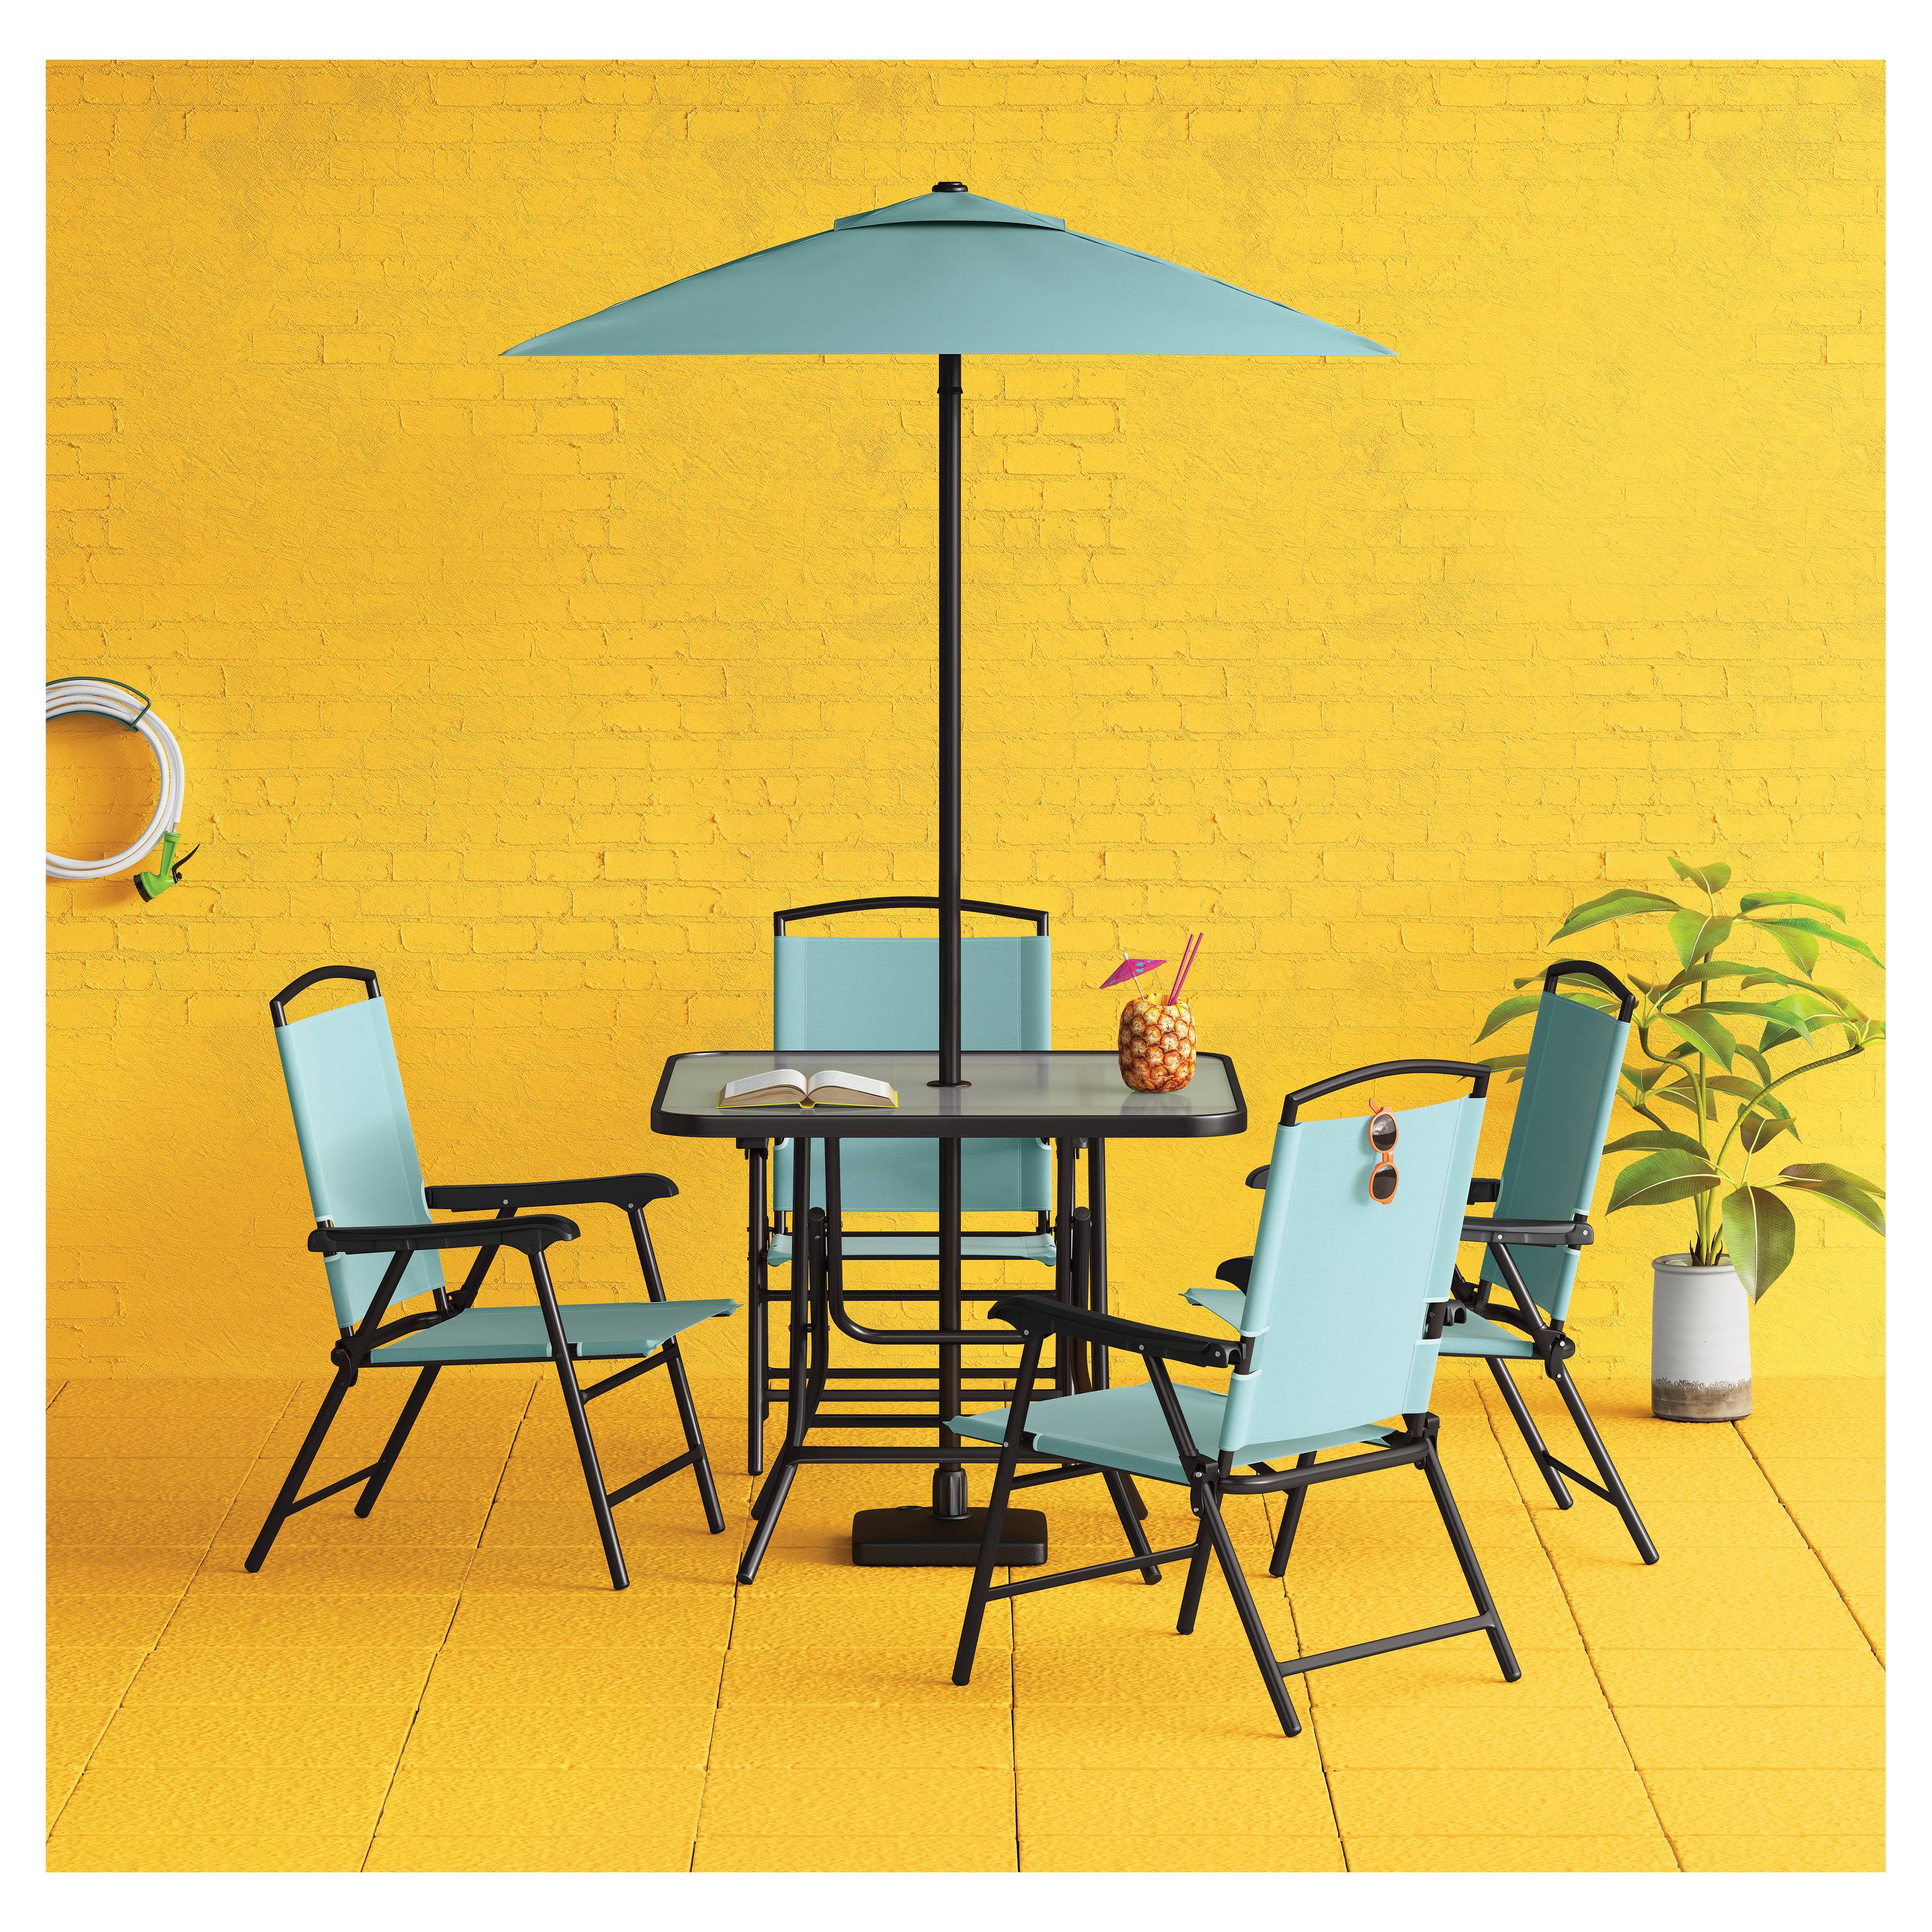 7-piece sling folding patio set for $99 at Target